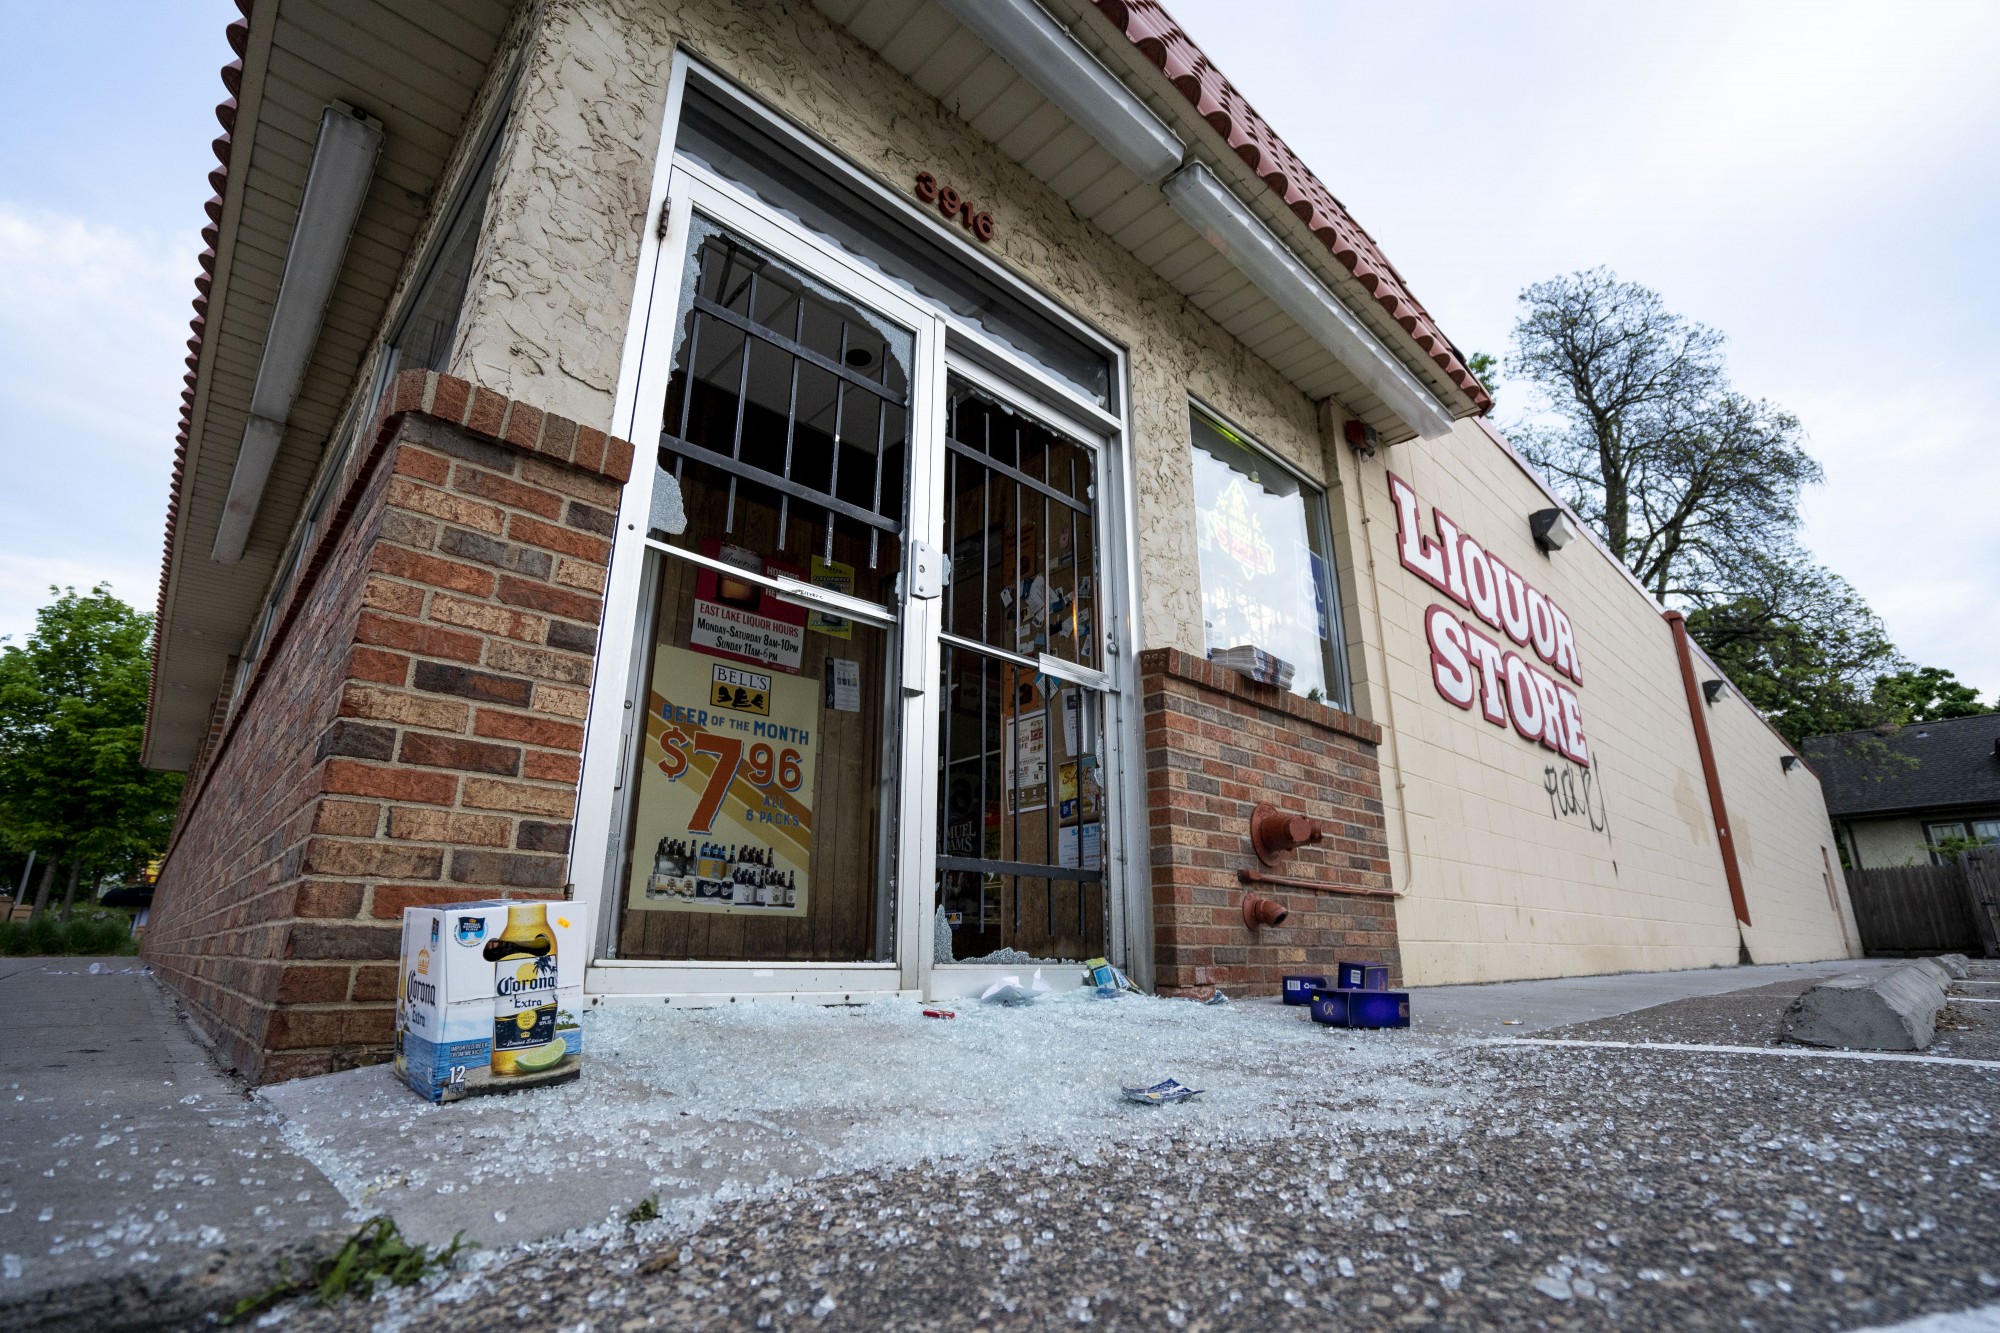 East Lake Liquor Store is seen the morning after a second night of protests that turned violent near the Minneapolis Police 3rd Precinct following the death of George Floyd. Dozens of businesses were vandalized and firefighters were still working to control several blazes still at hand on Thursday, May 28. 